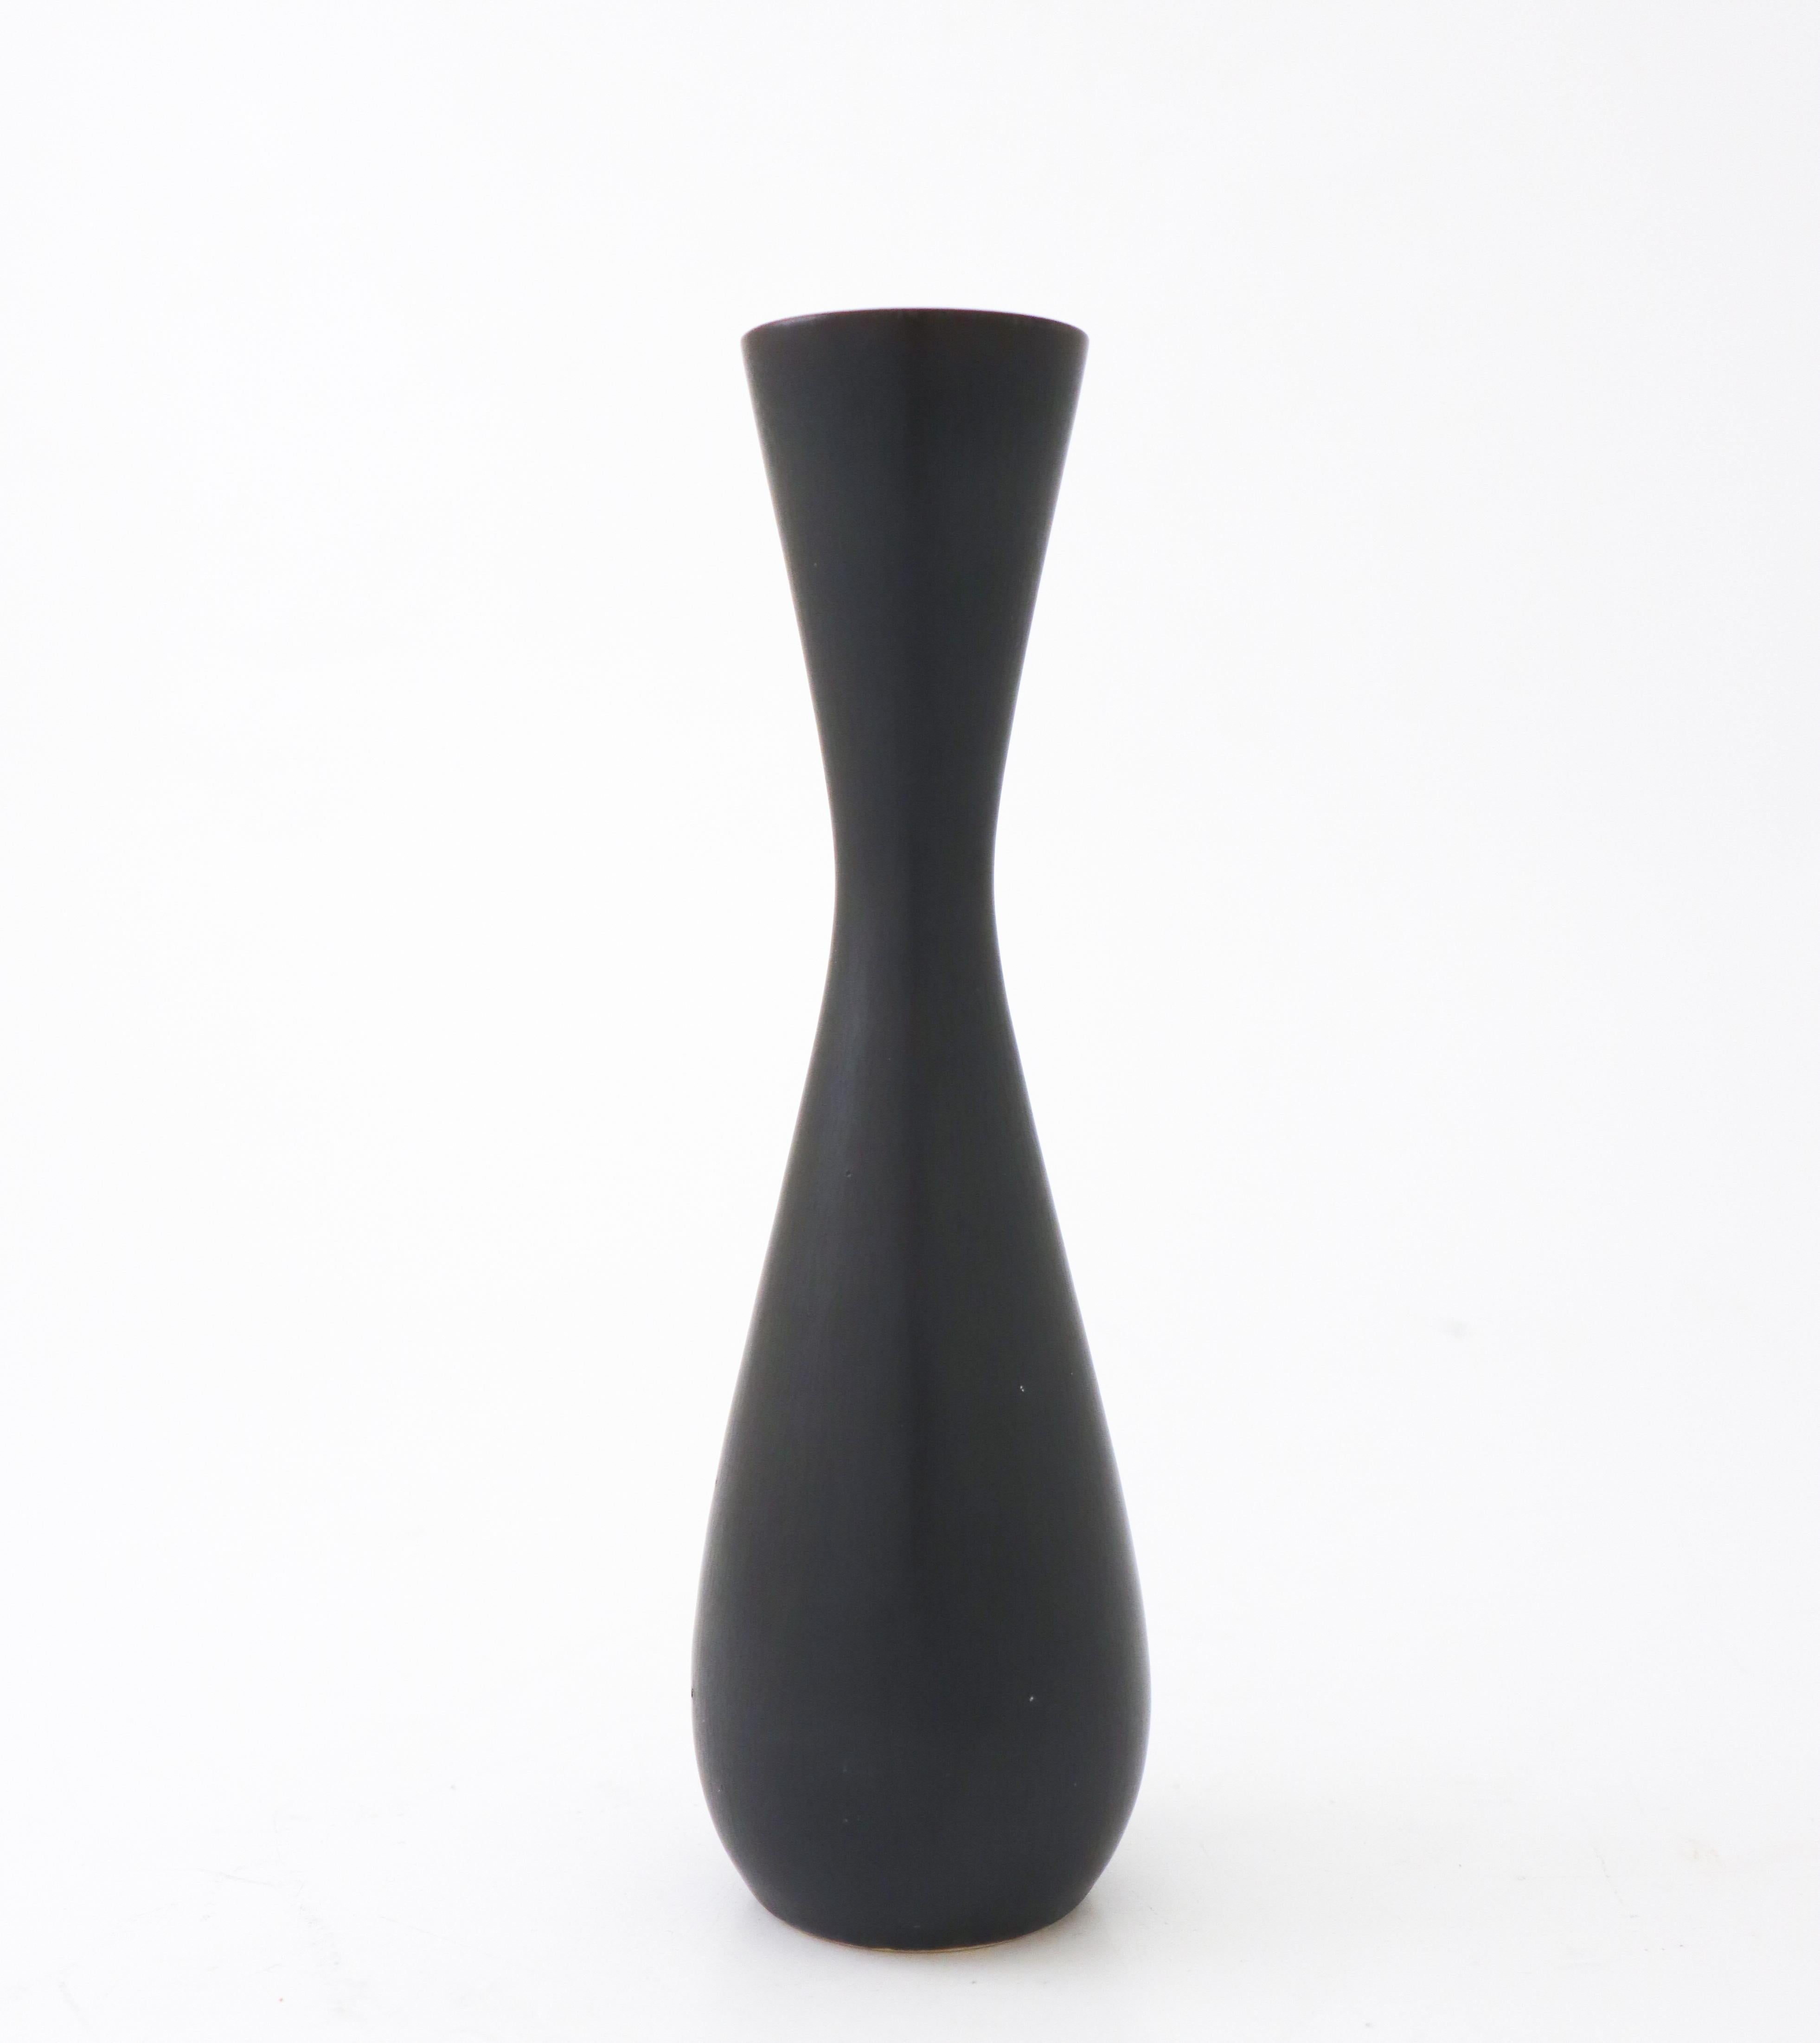 A beautiful black mid-century Swedish vase designed by Carl-Harry Stålhane at Rörstrand, Sweden, the vase is 20.5 cm high and in very good condition except from some air-bubbles in the glaze. This vase vase designed and produced in the mid-century.